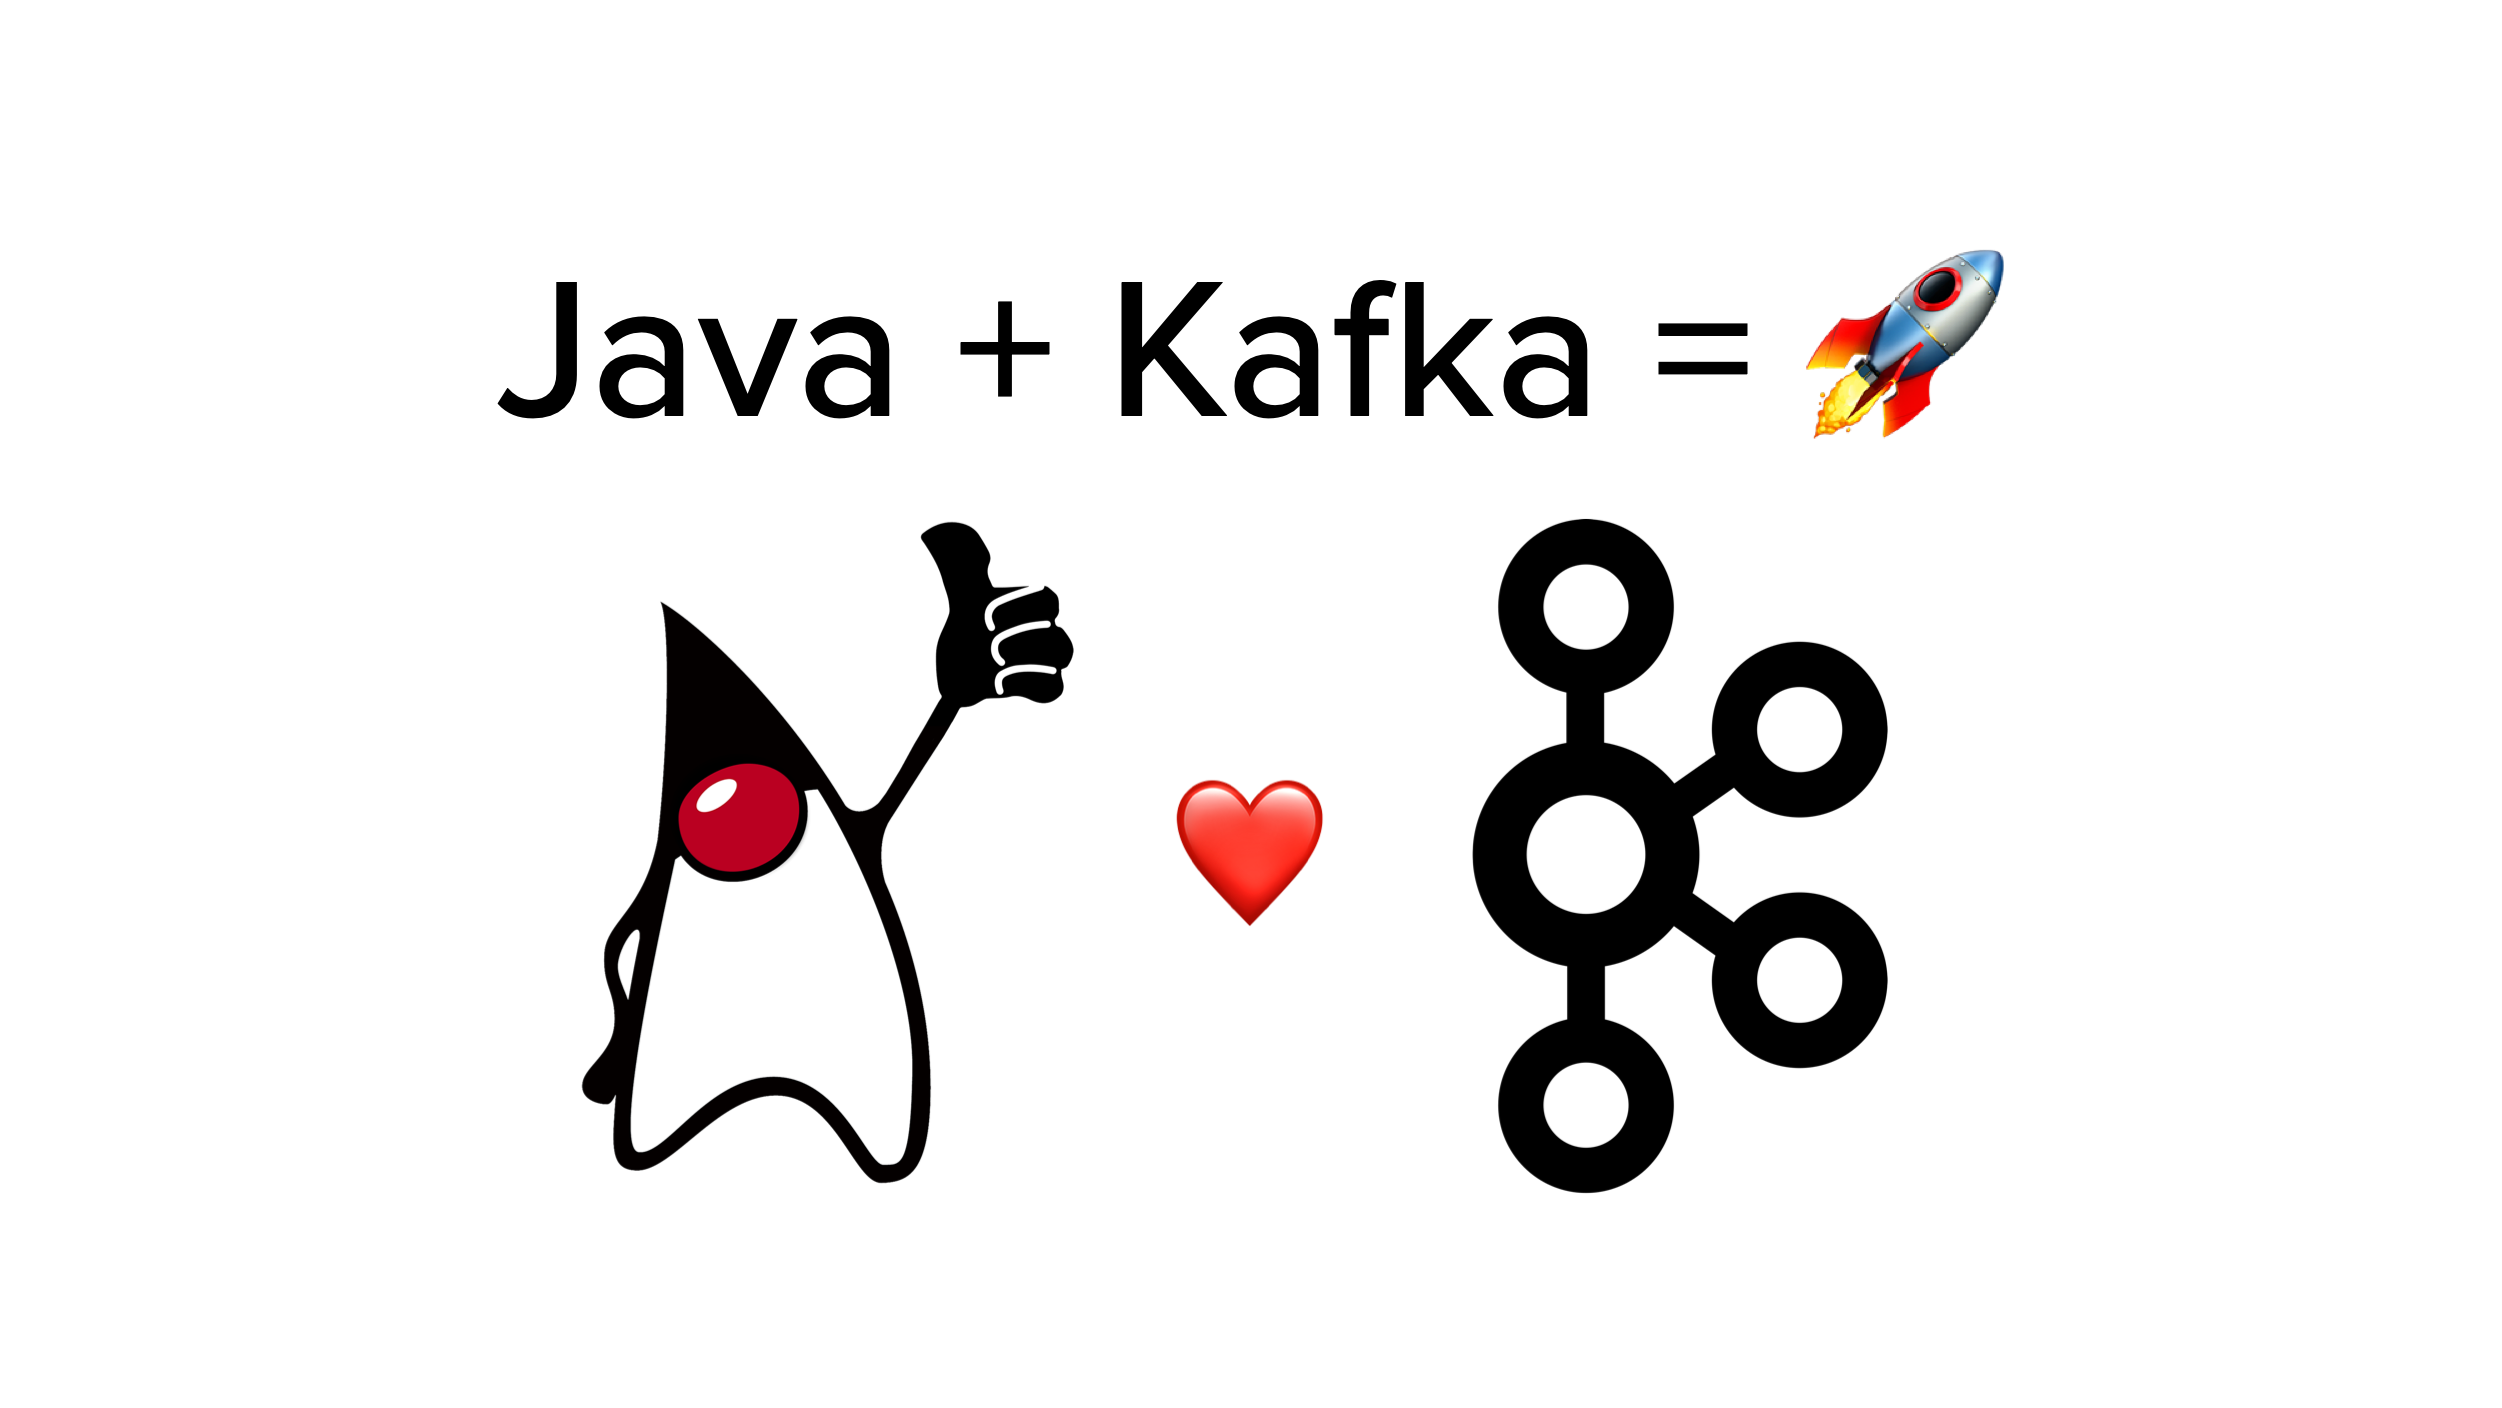 Kafka with Java: Build a Secure, Scalable Messaging App